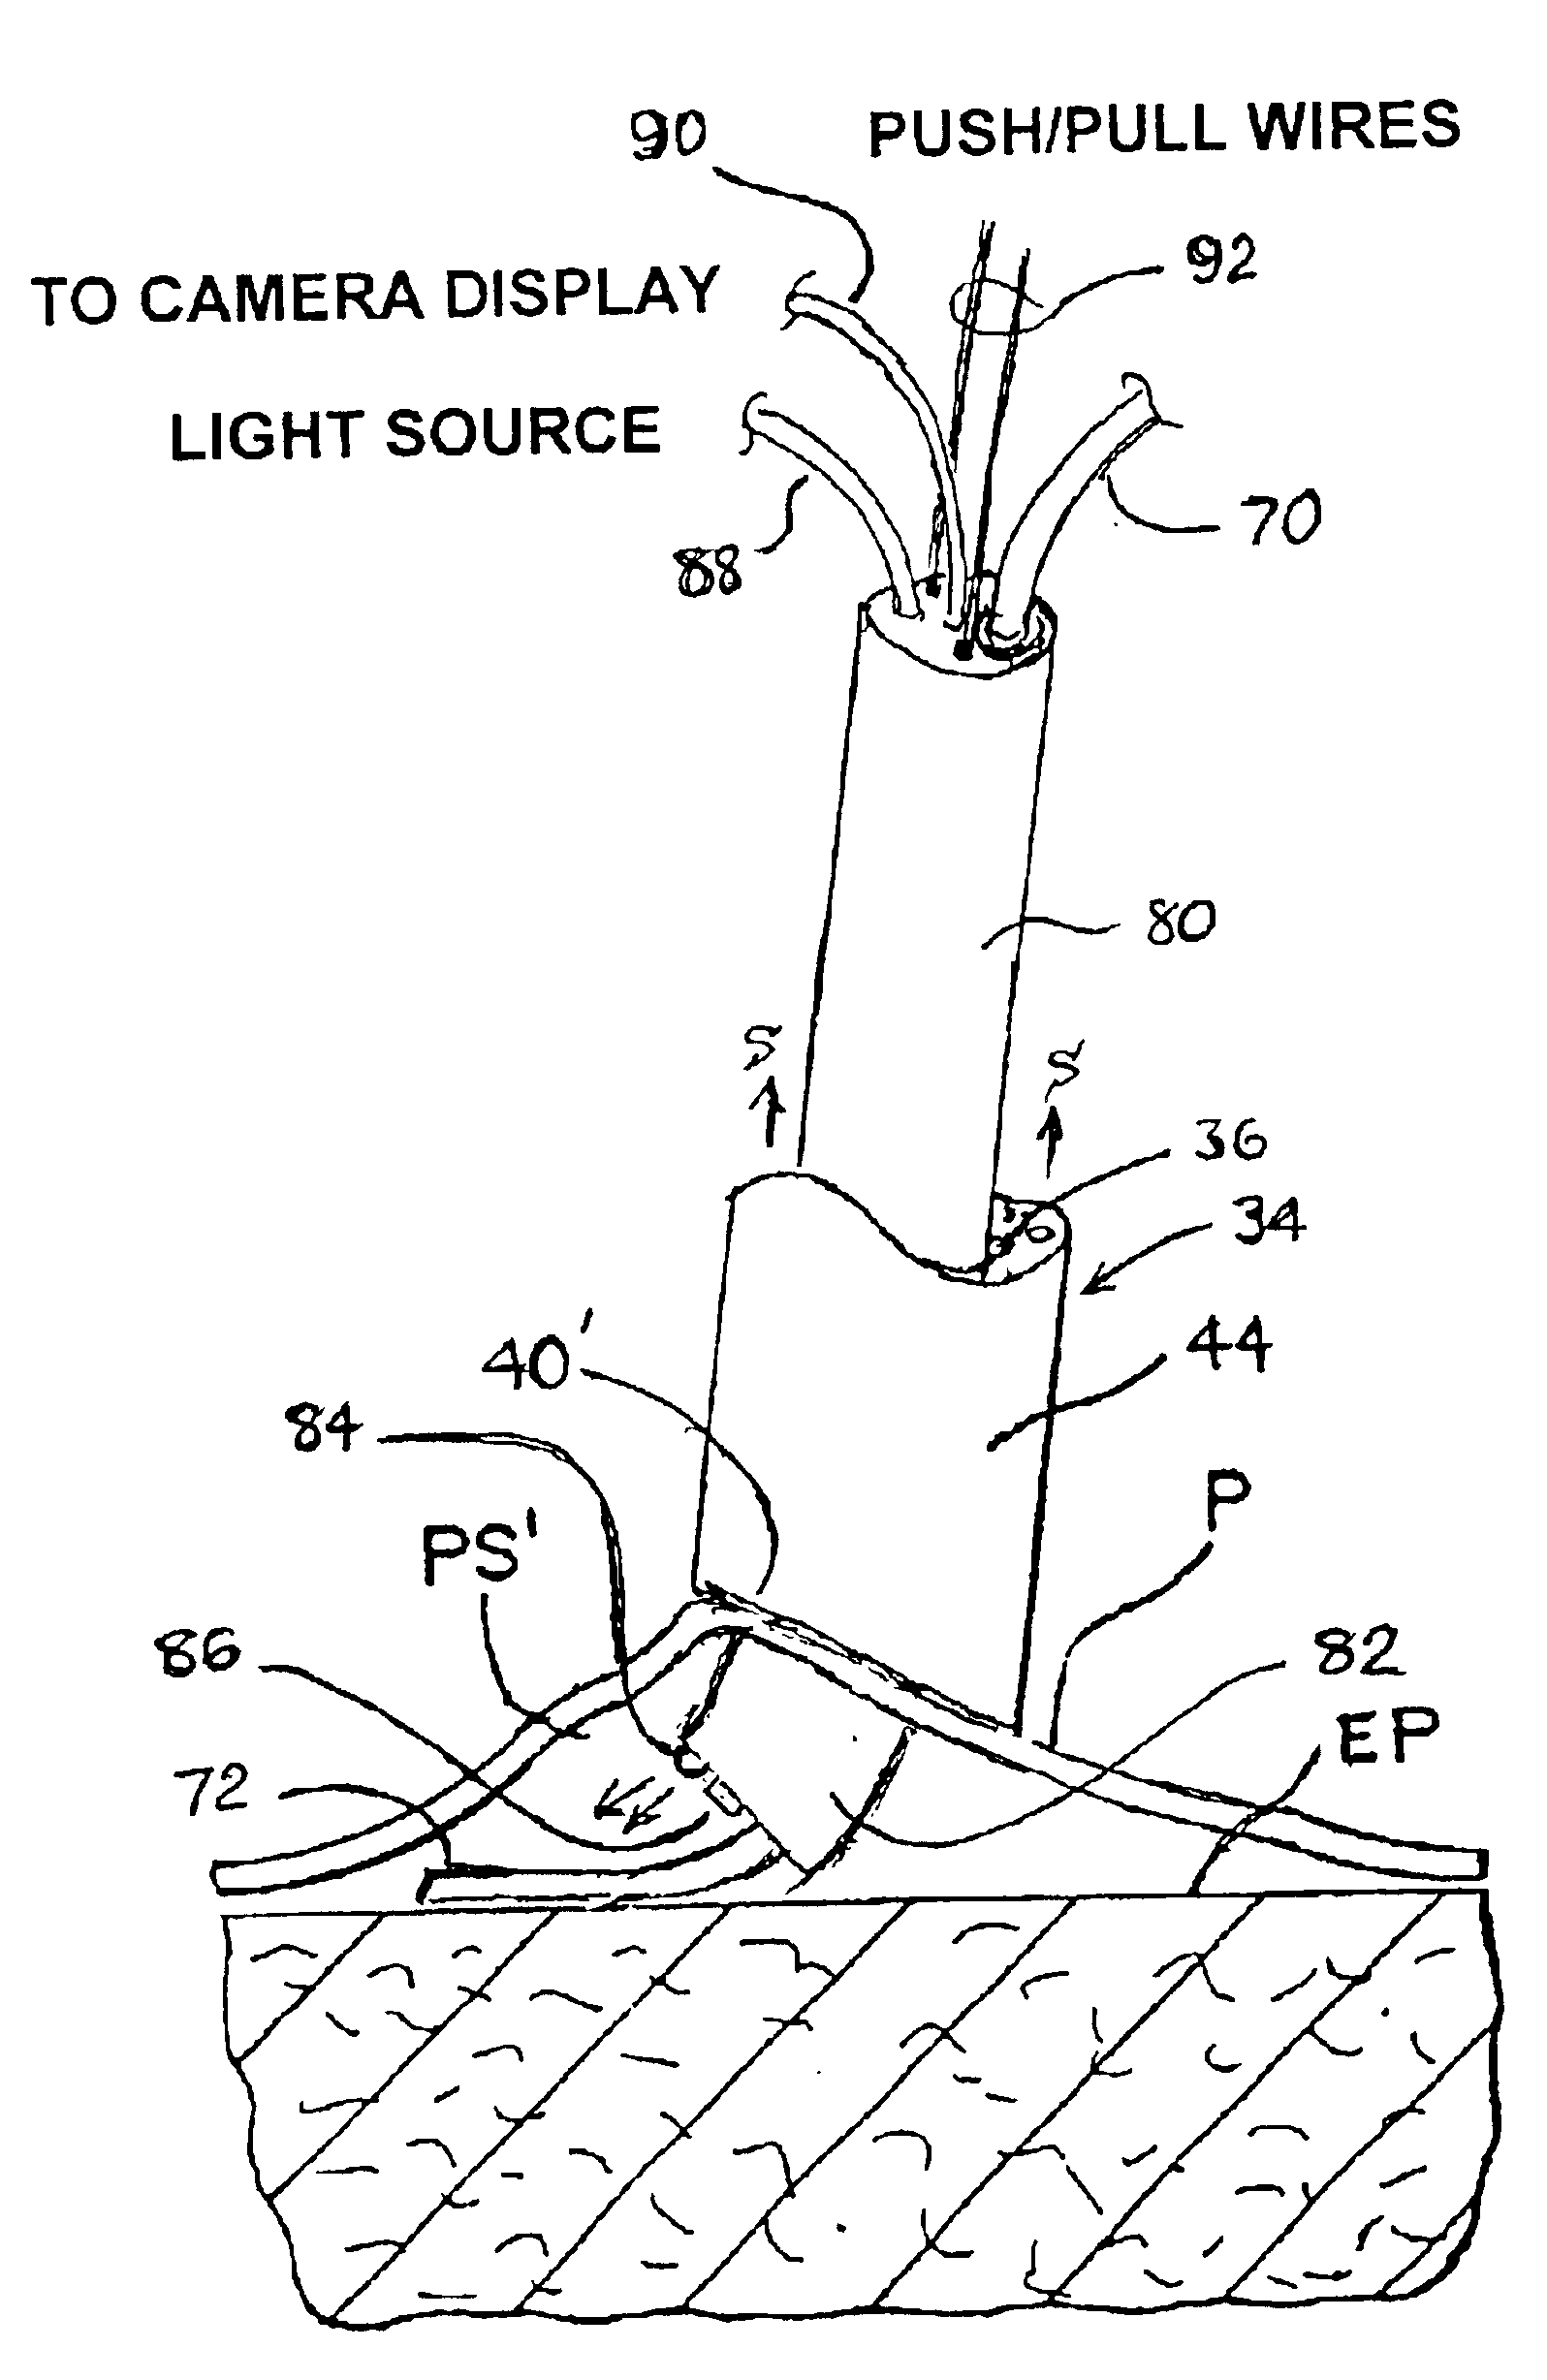 Anatomical space access tools and methods